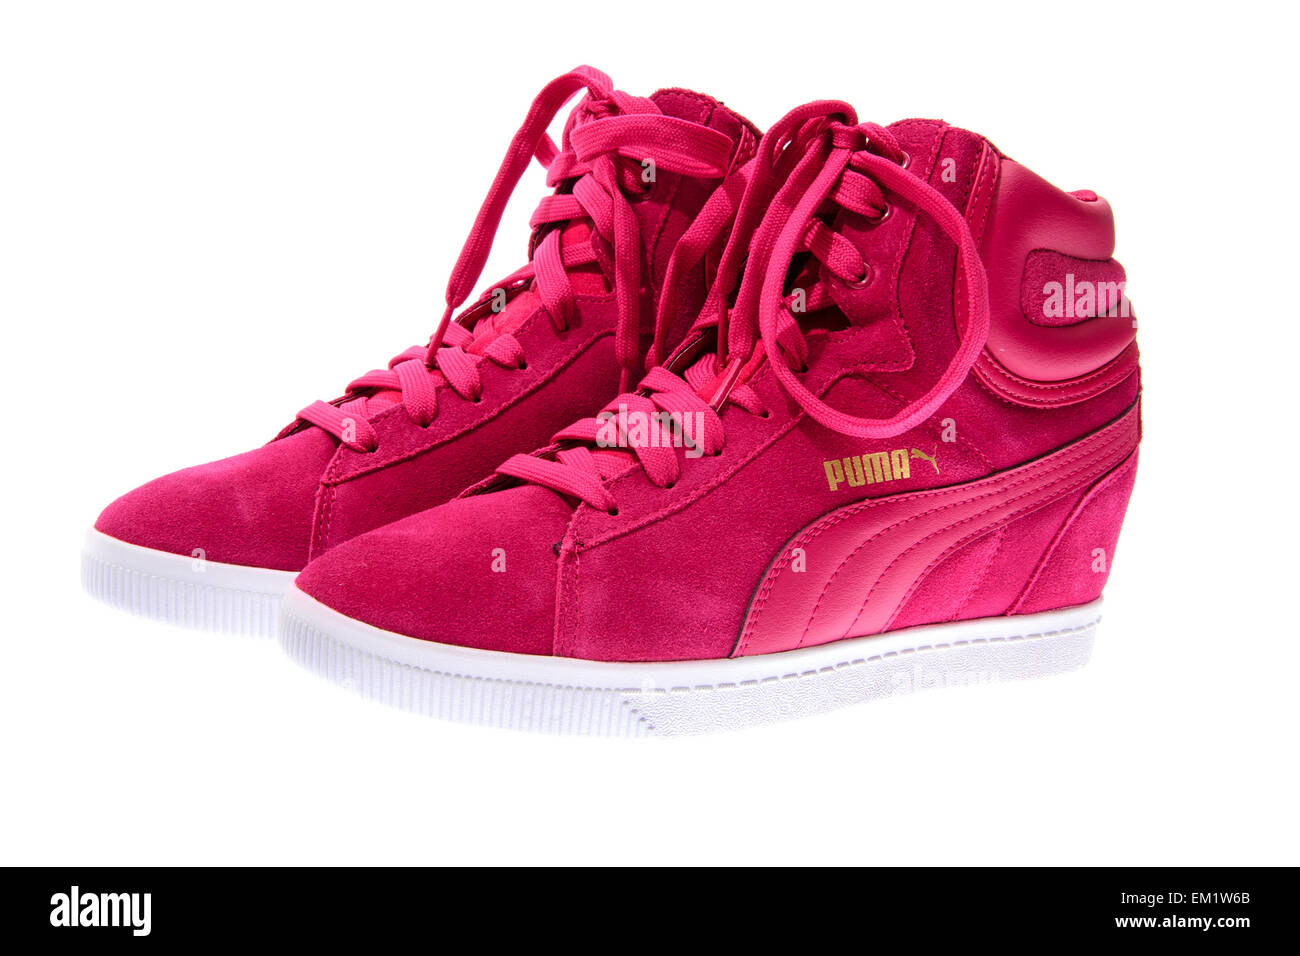 Minsk, Belarus - March 18, 2015: Pink Female Beautiful Shoes Puma with High  Heels. Isolated on White Background. Puma - a German Stock Photo - Alamy